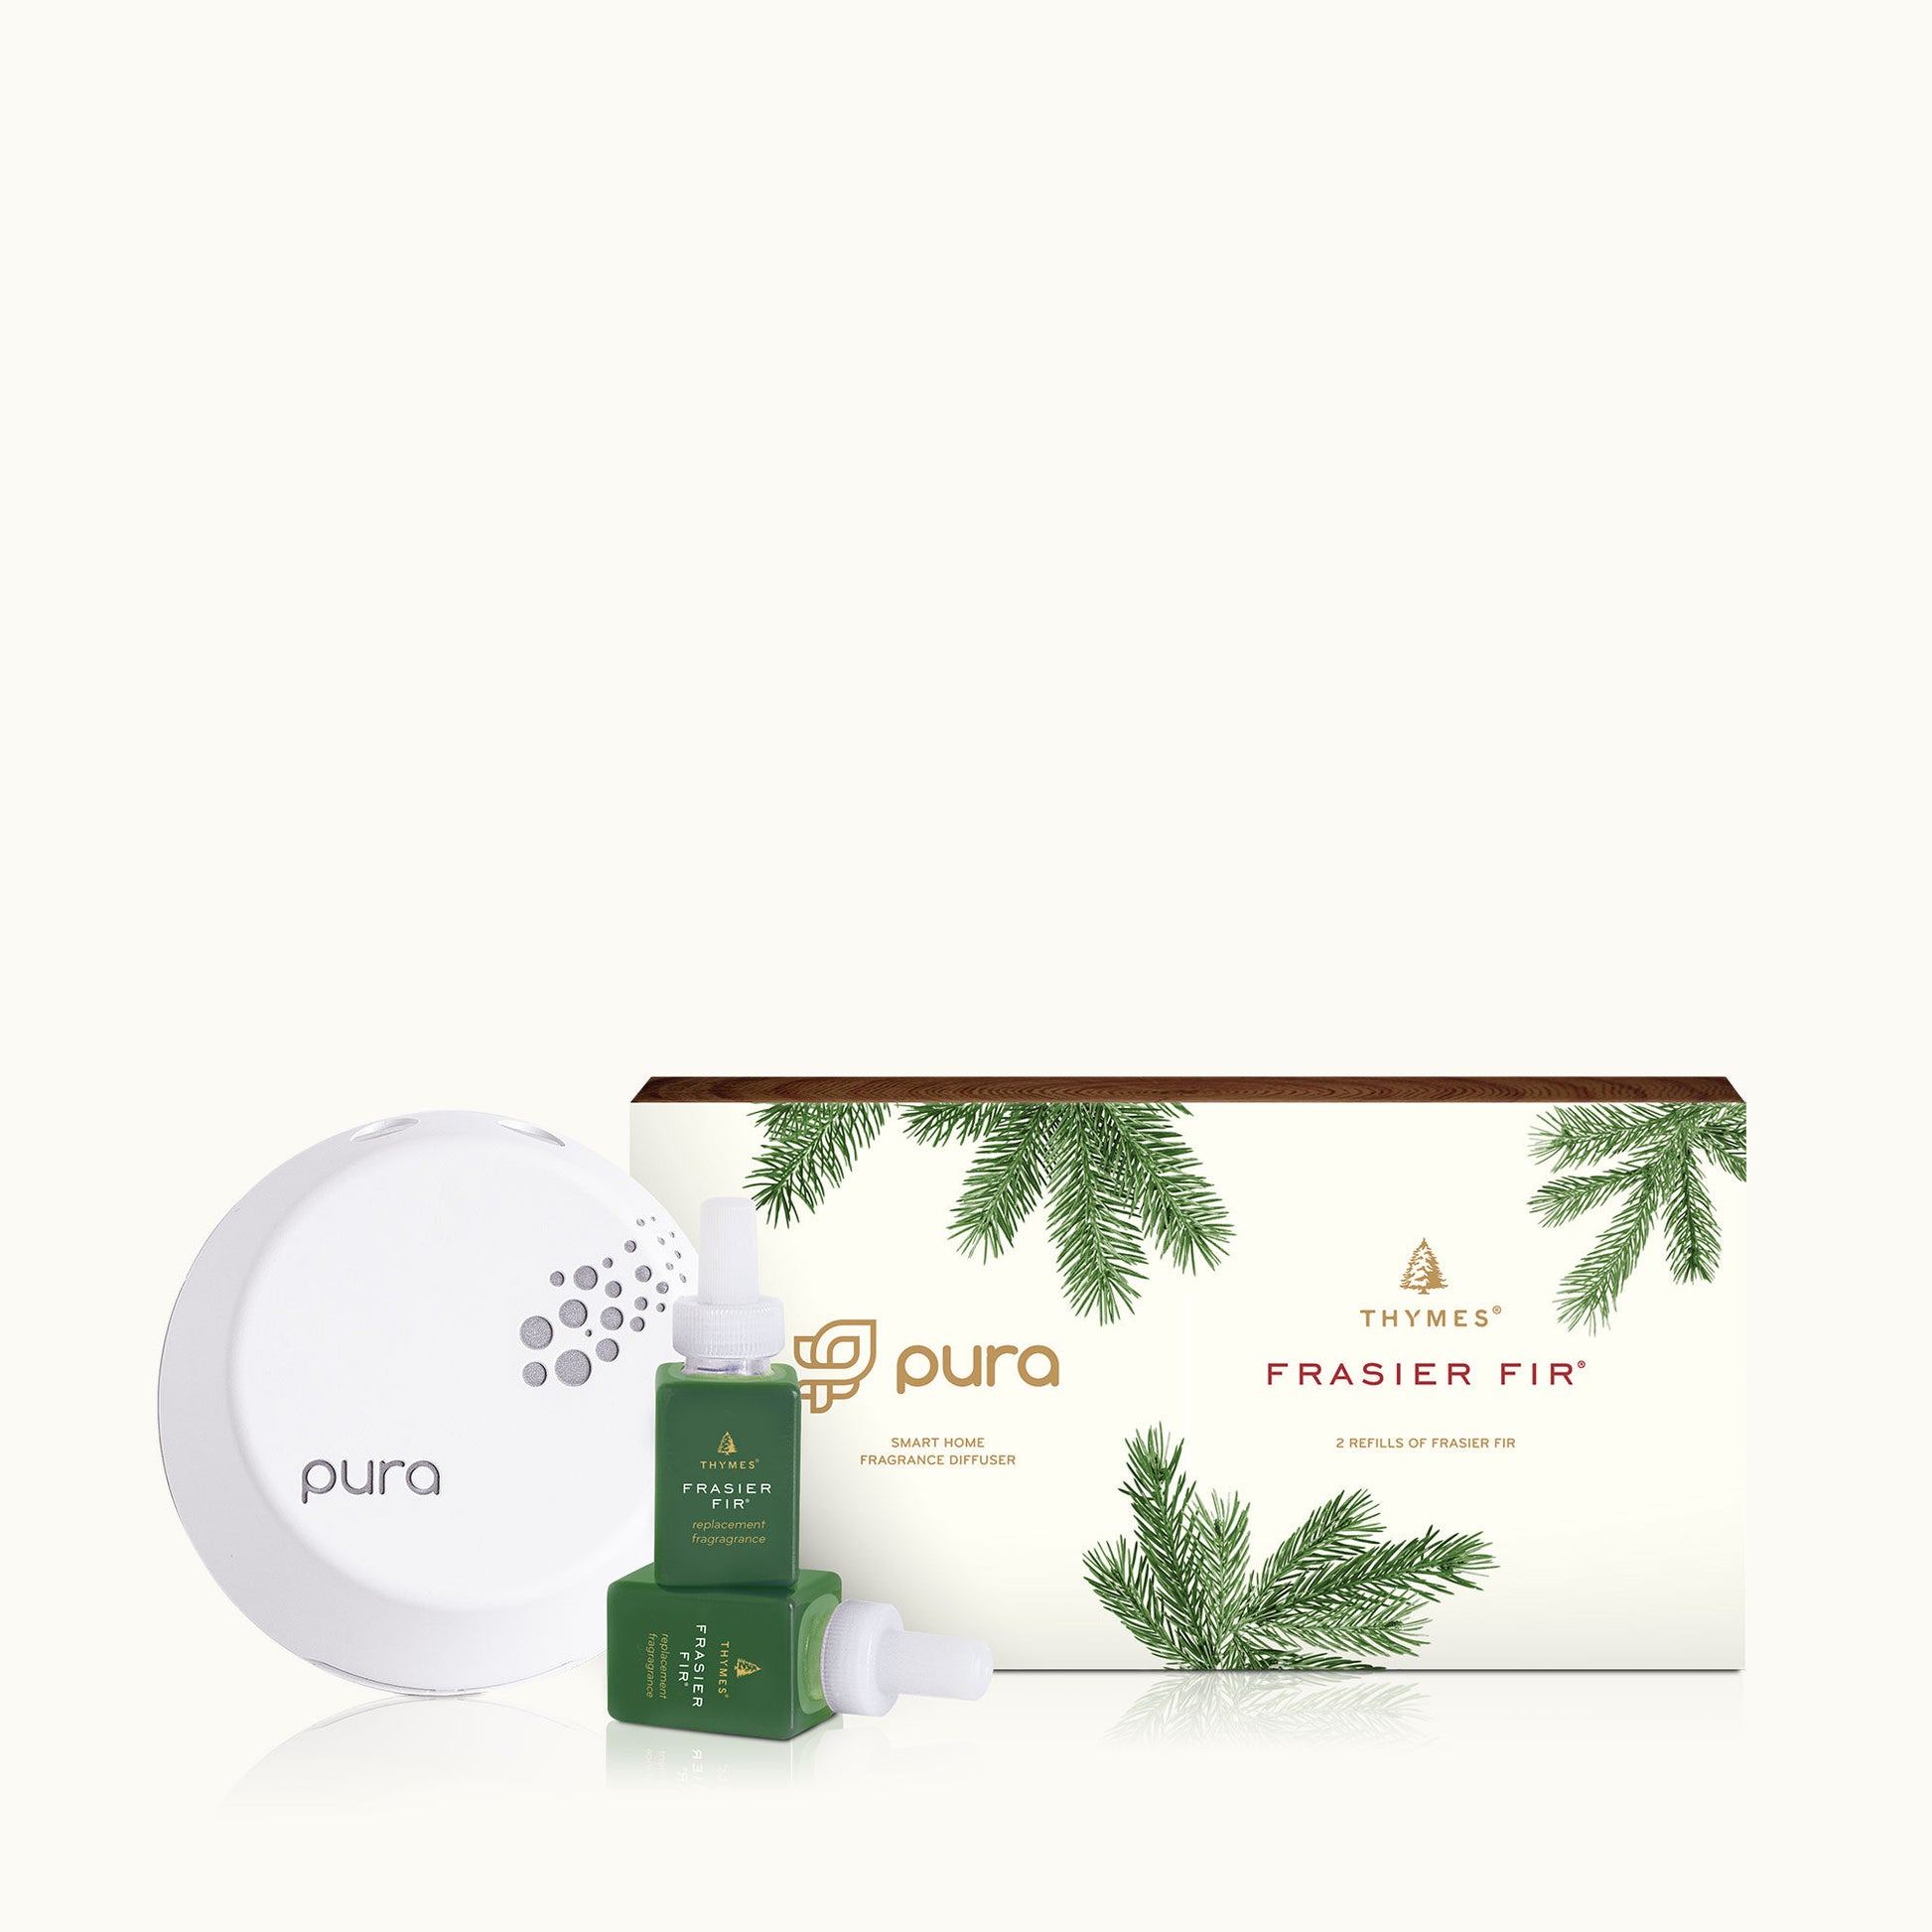 Thymes Frasier Fir Pura Smart Home Diffuser Kit-Diffuser-Thymes-The Village Shoppe, Women’s Fashion Boutique, Shop Online and In Store - Located in Muscle Shoals, AL.